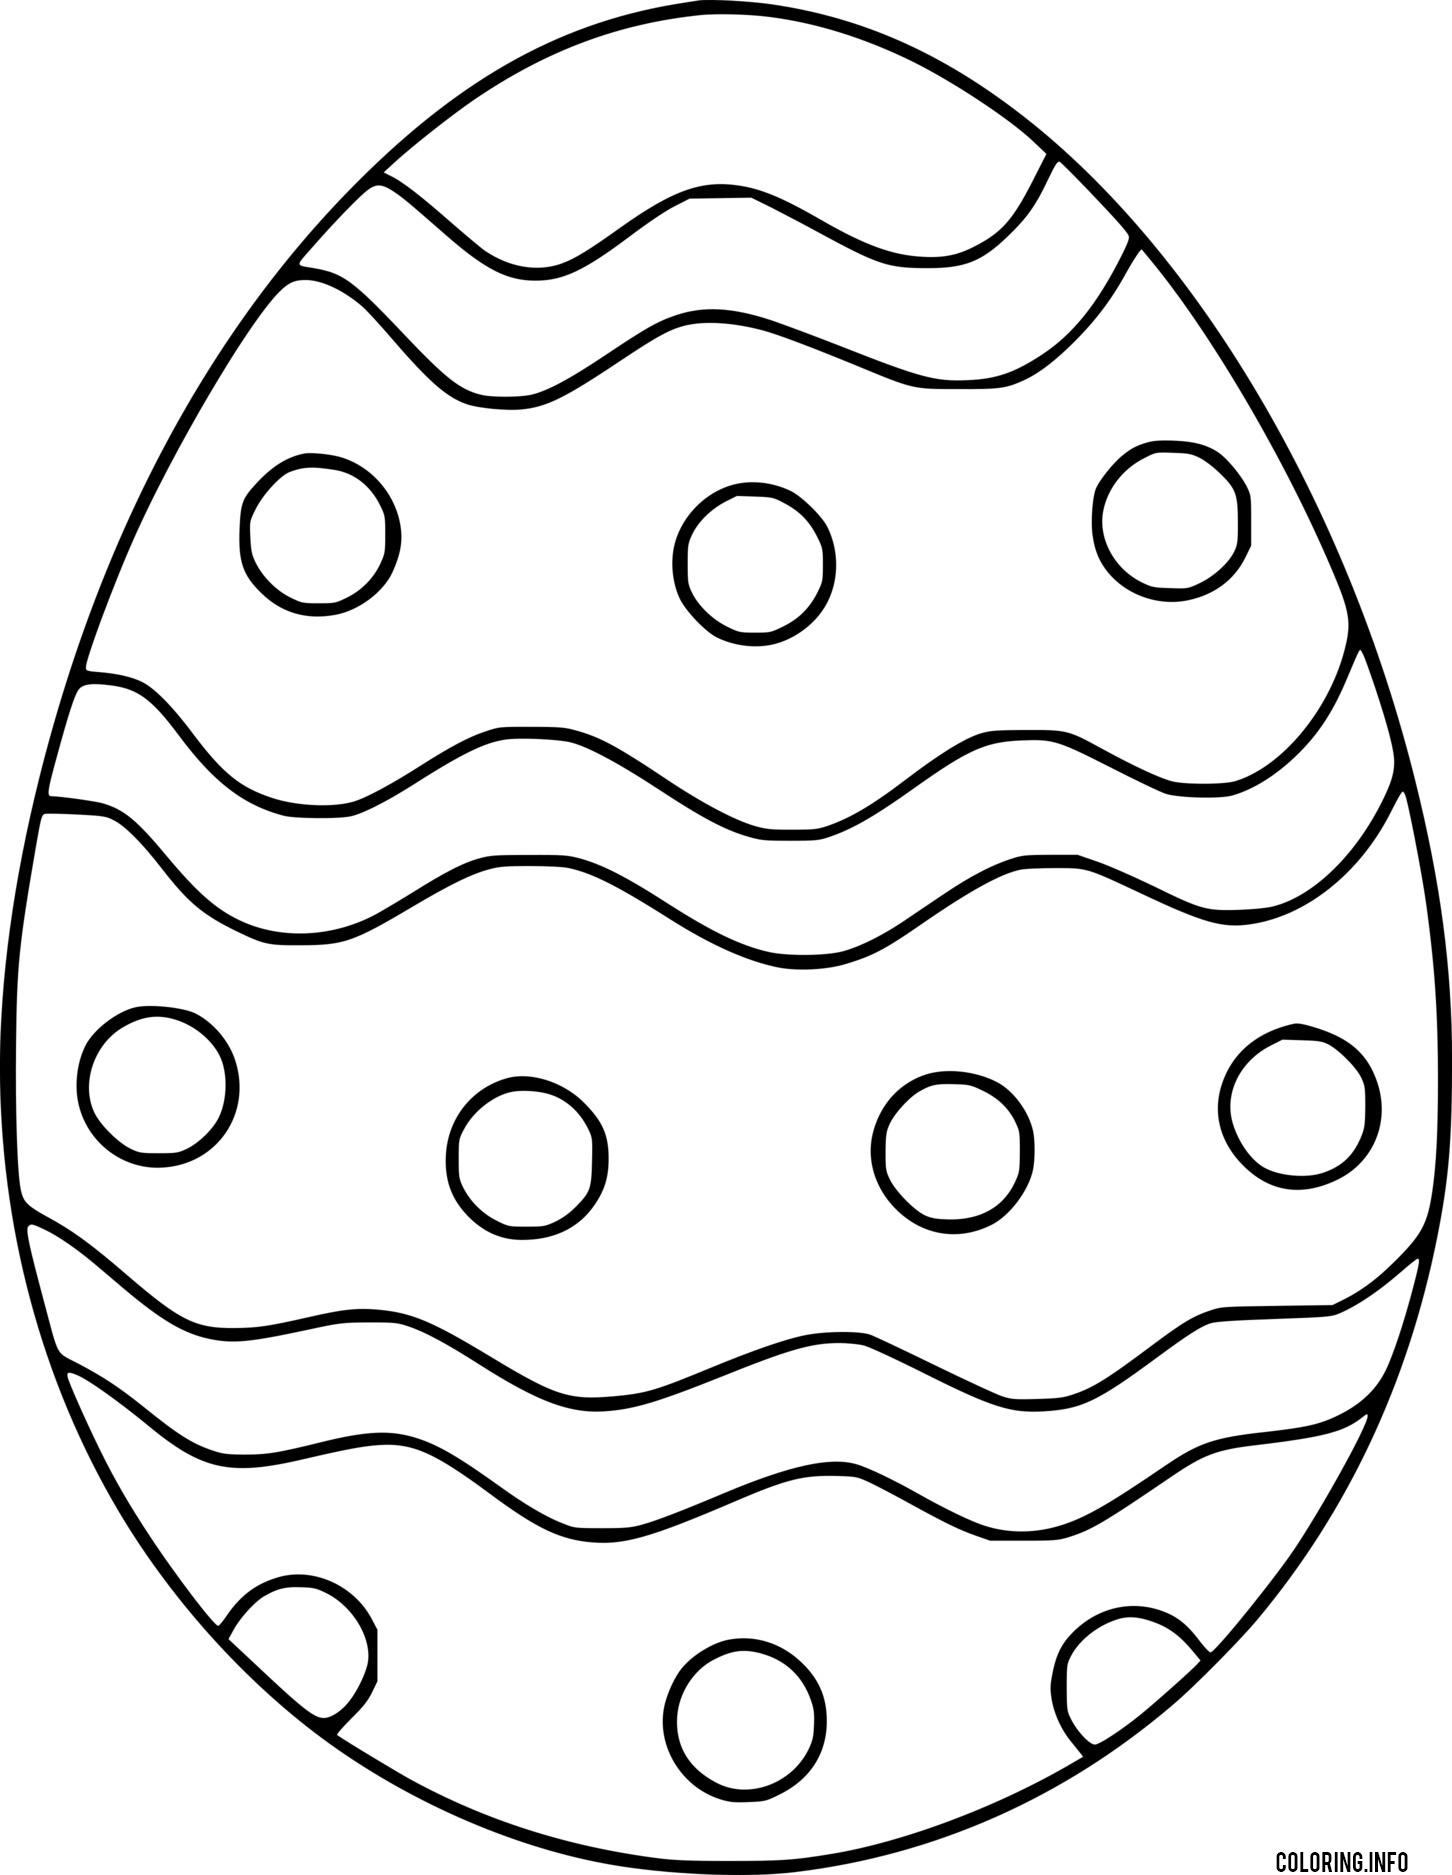 Easter Egg With Circle And Wave Line Patterns coloring